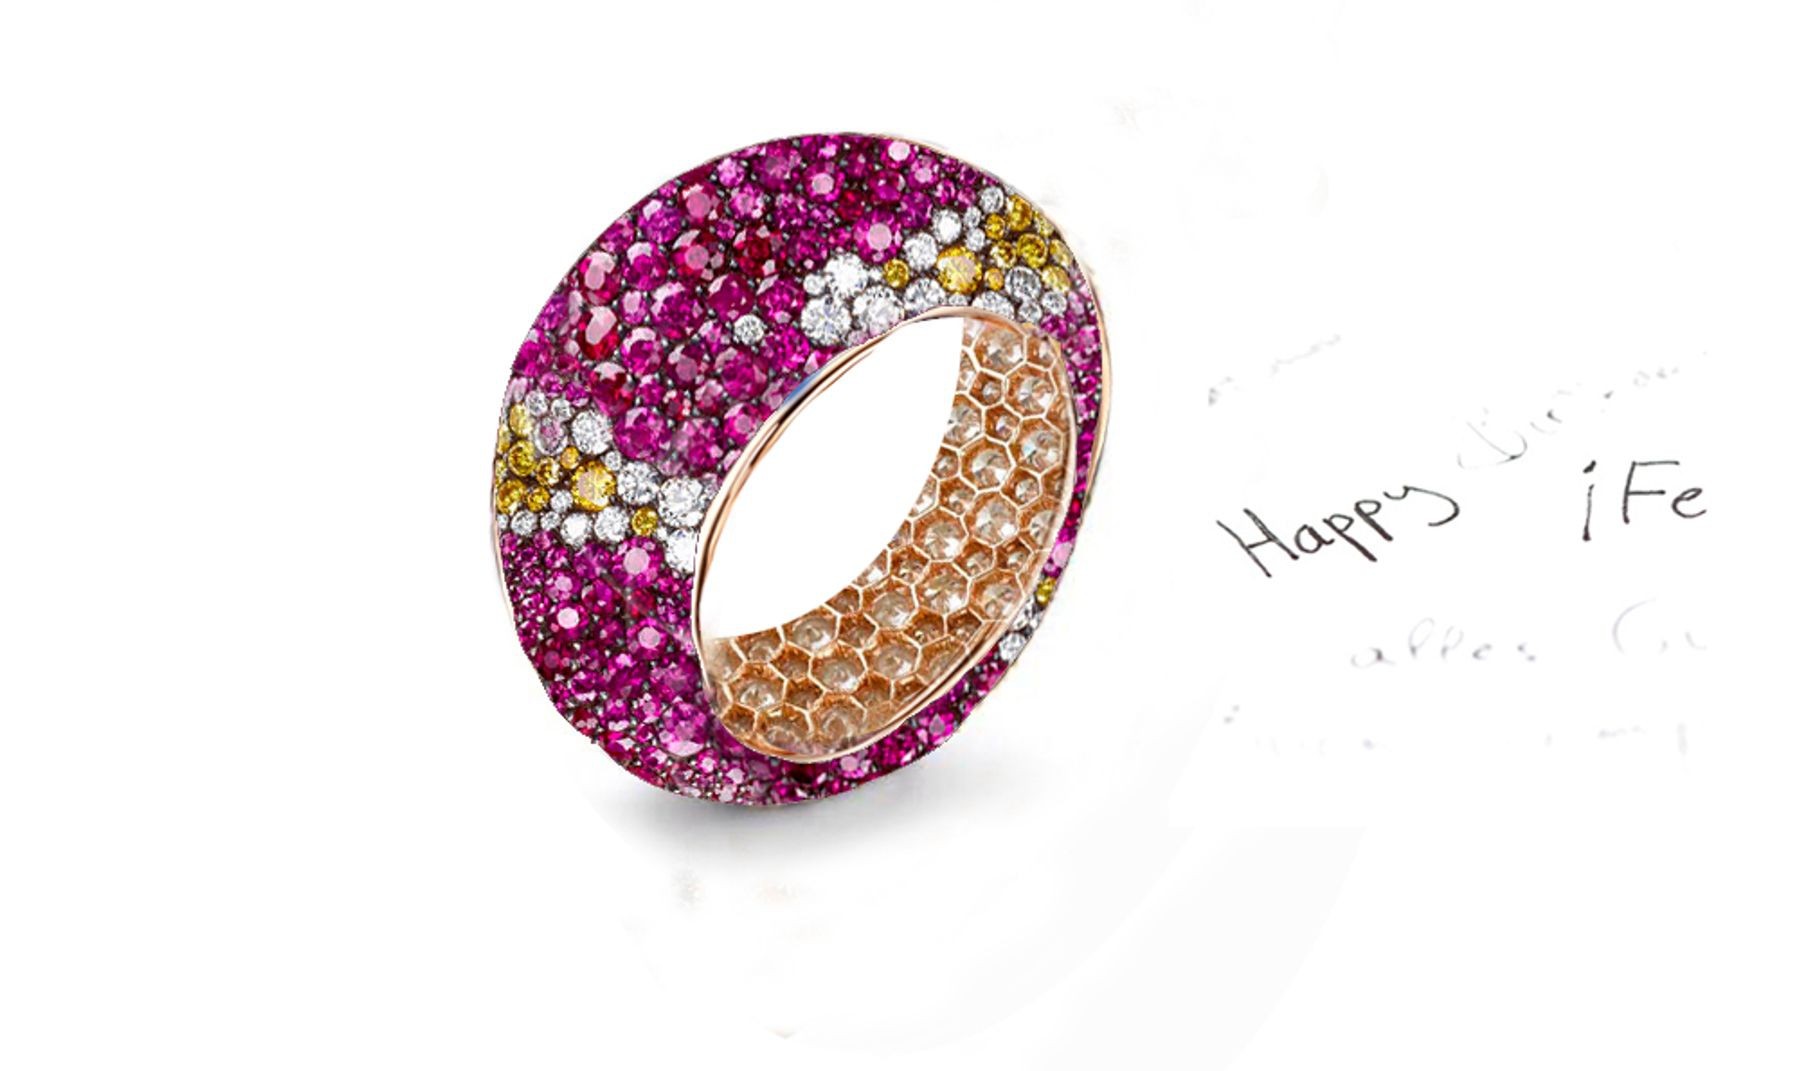 Declare Your Lasting Love With Custom Manufactured Diamonds & Colored Gemstones Eternity Rings & Bands